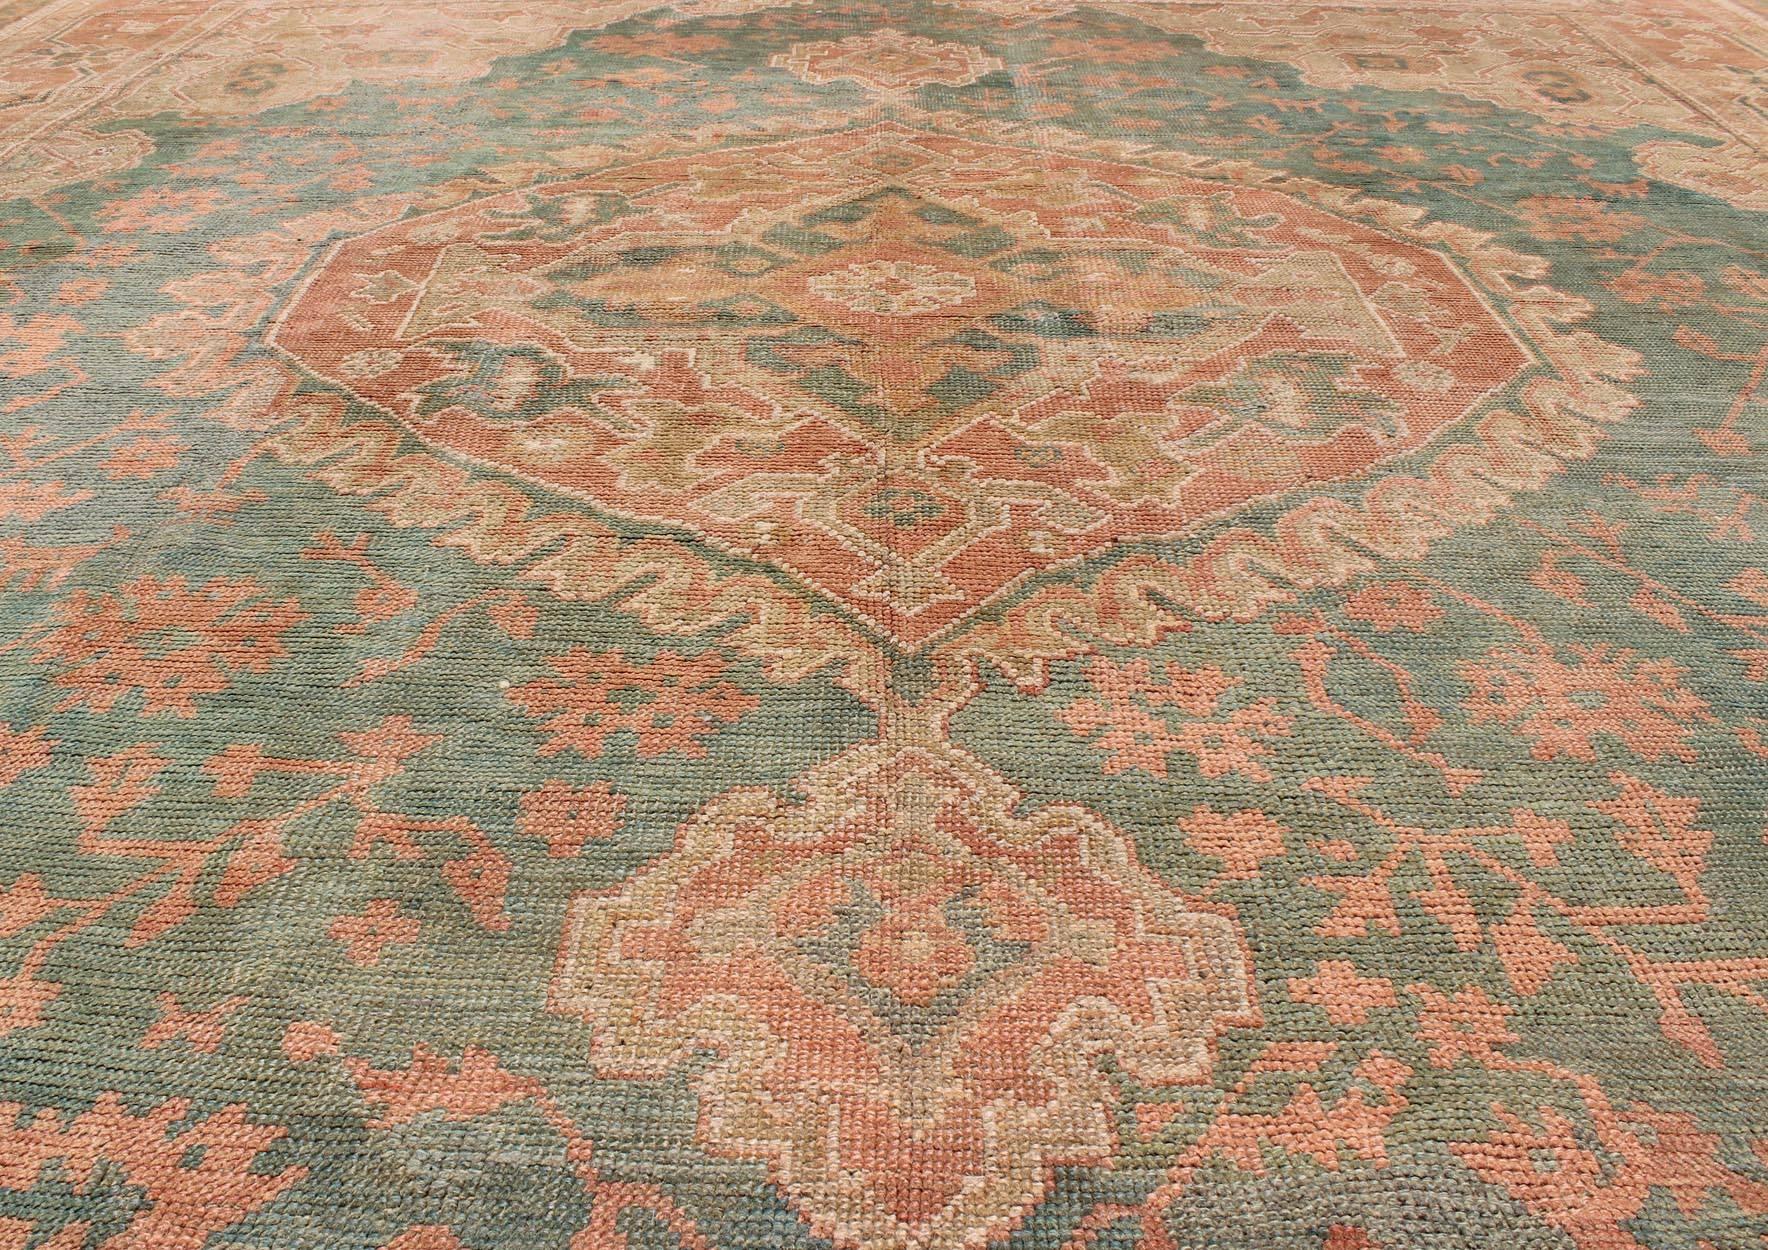 Wool Antique Turkish Medallion Oushak Rug in Teal Green, Rose and Buttery Colors